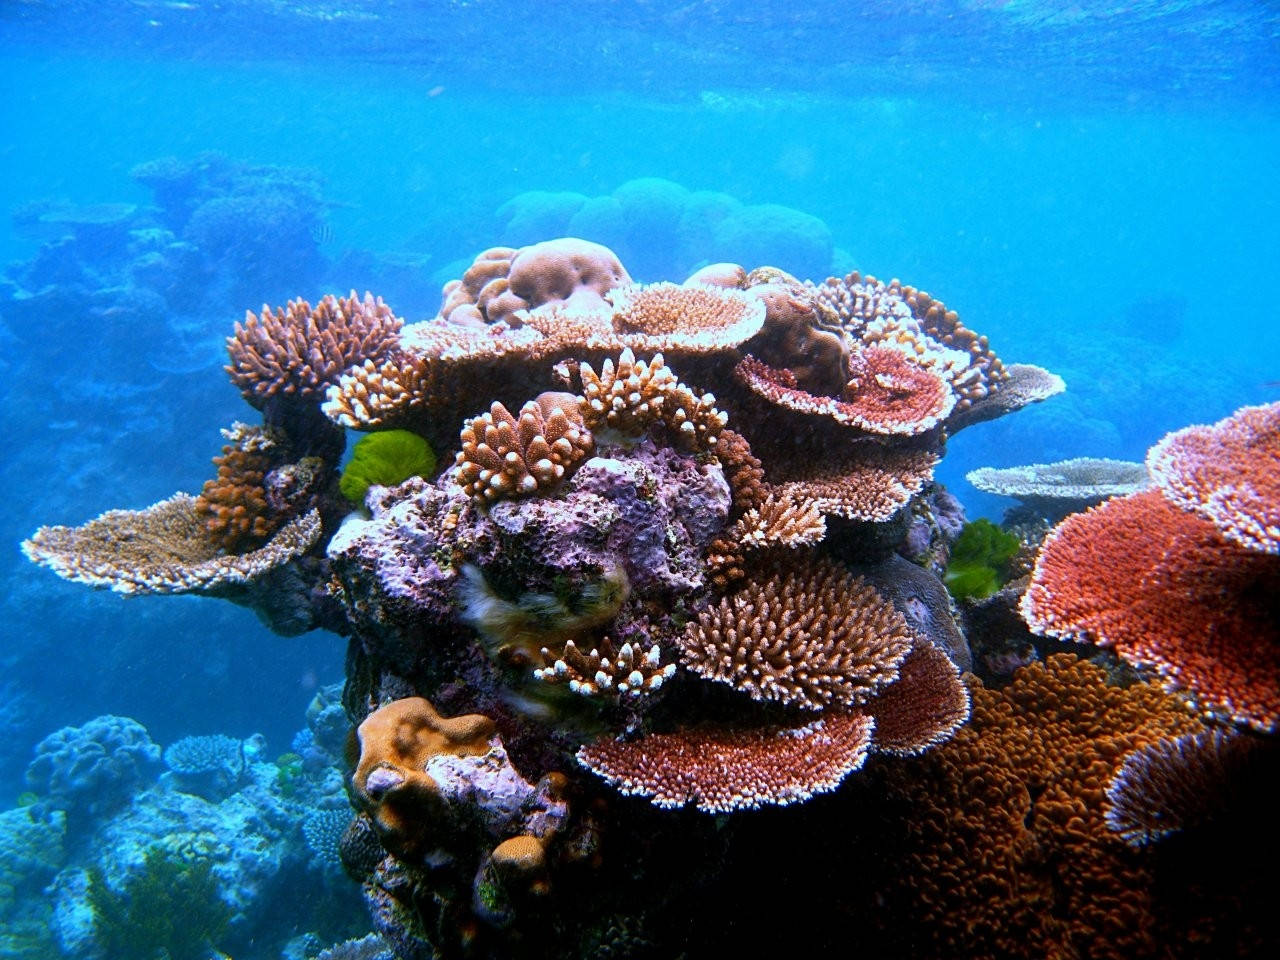 Vibrant Underwater Ecosystem - The Coral Reef of Eastern Pacific Wallpaper